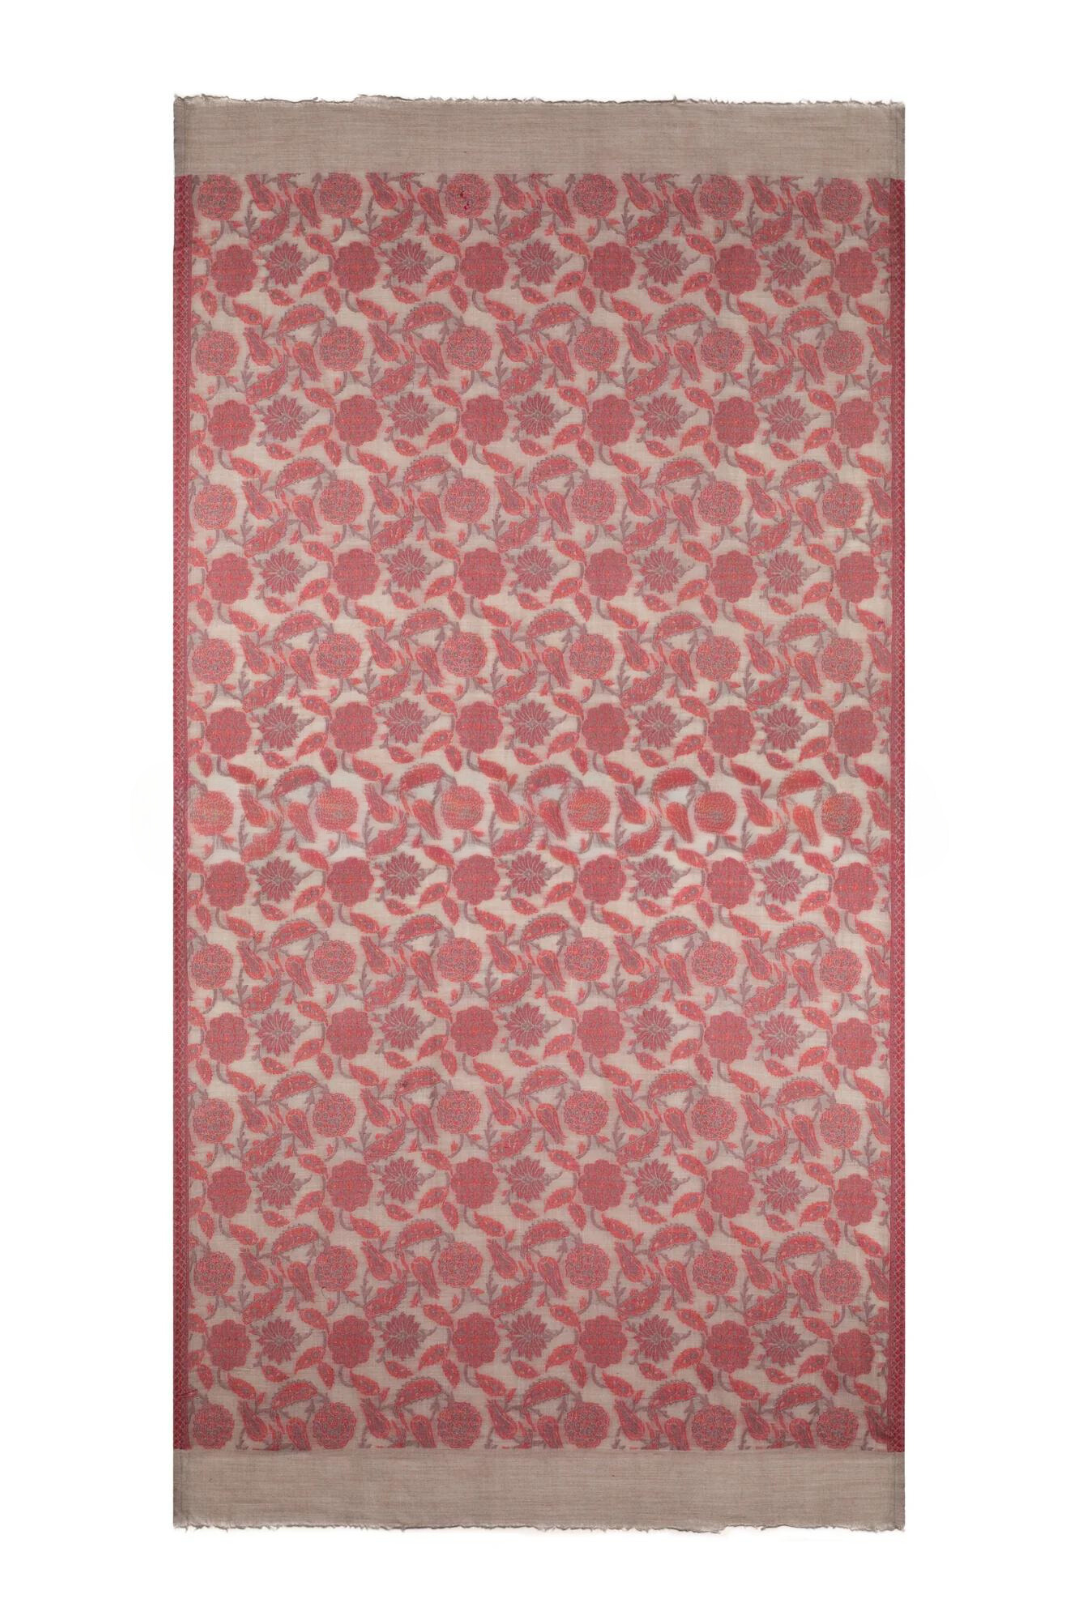 Abstract Floral Paisley Cashmere Pashmina Shawl - Red